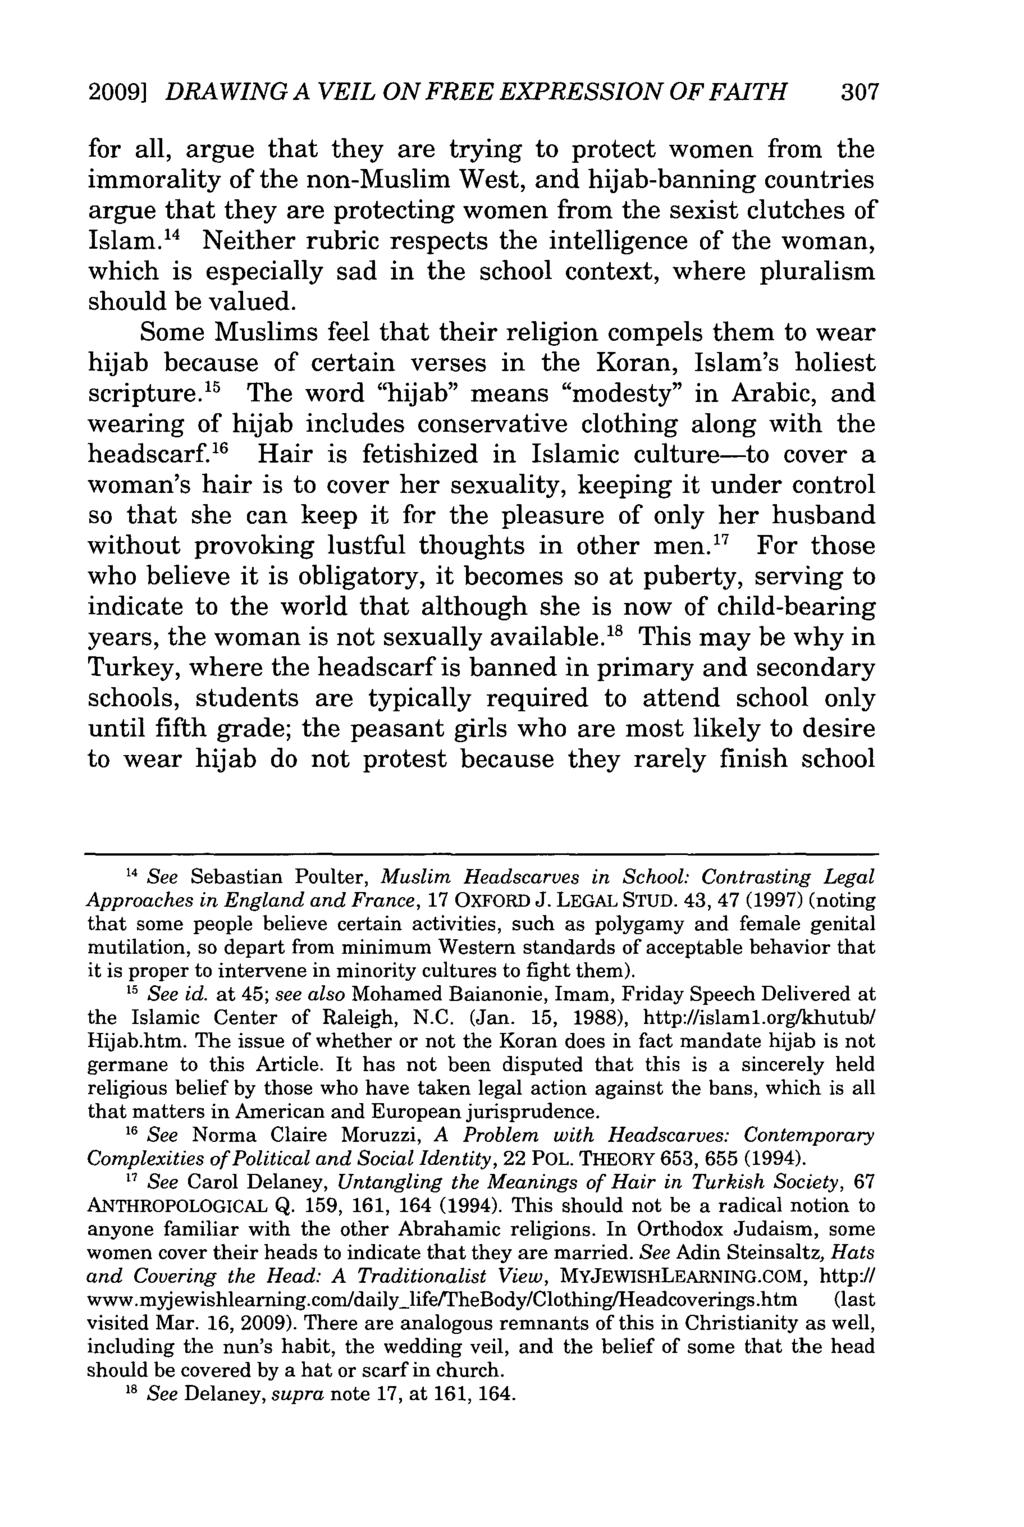 2009] DRAWING A VEIL ON FREE EXPRESSION OF FAITH 307 for all, argue that they are trying to protect women from the immorality of the non-muslim West, and hijab-banning countries argue that they are